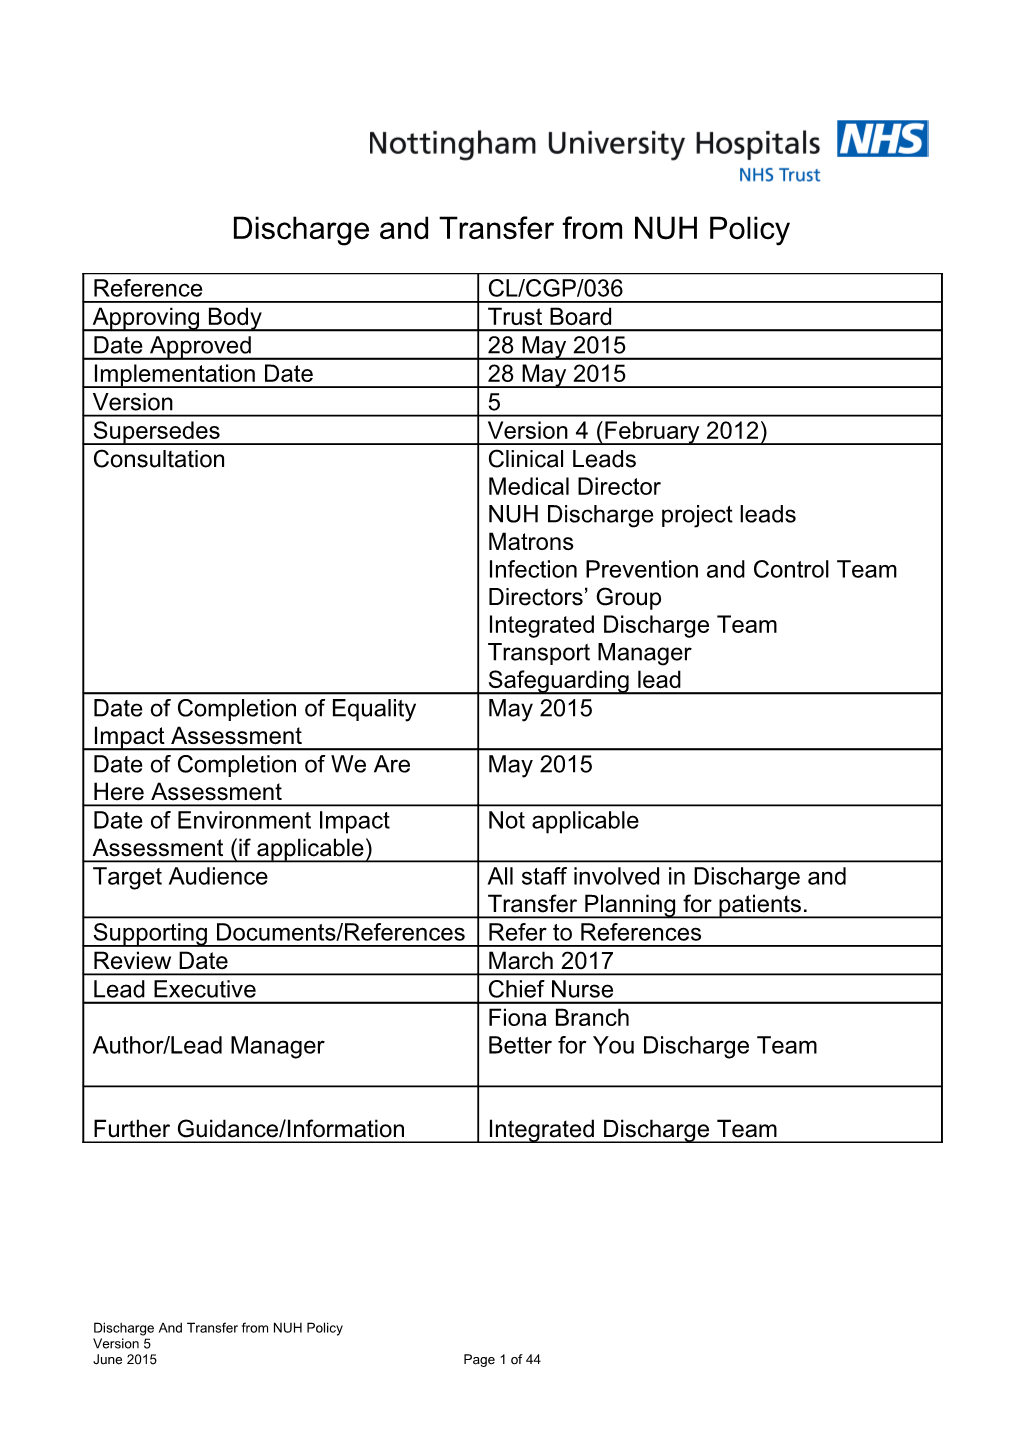 Discharge and Transfer Policy